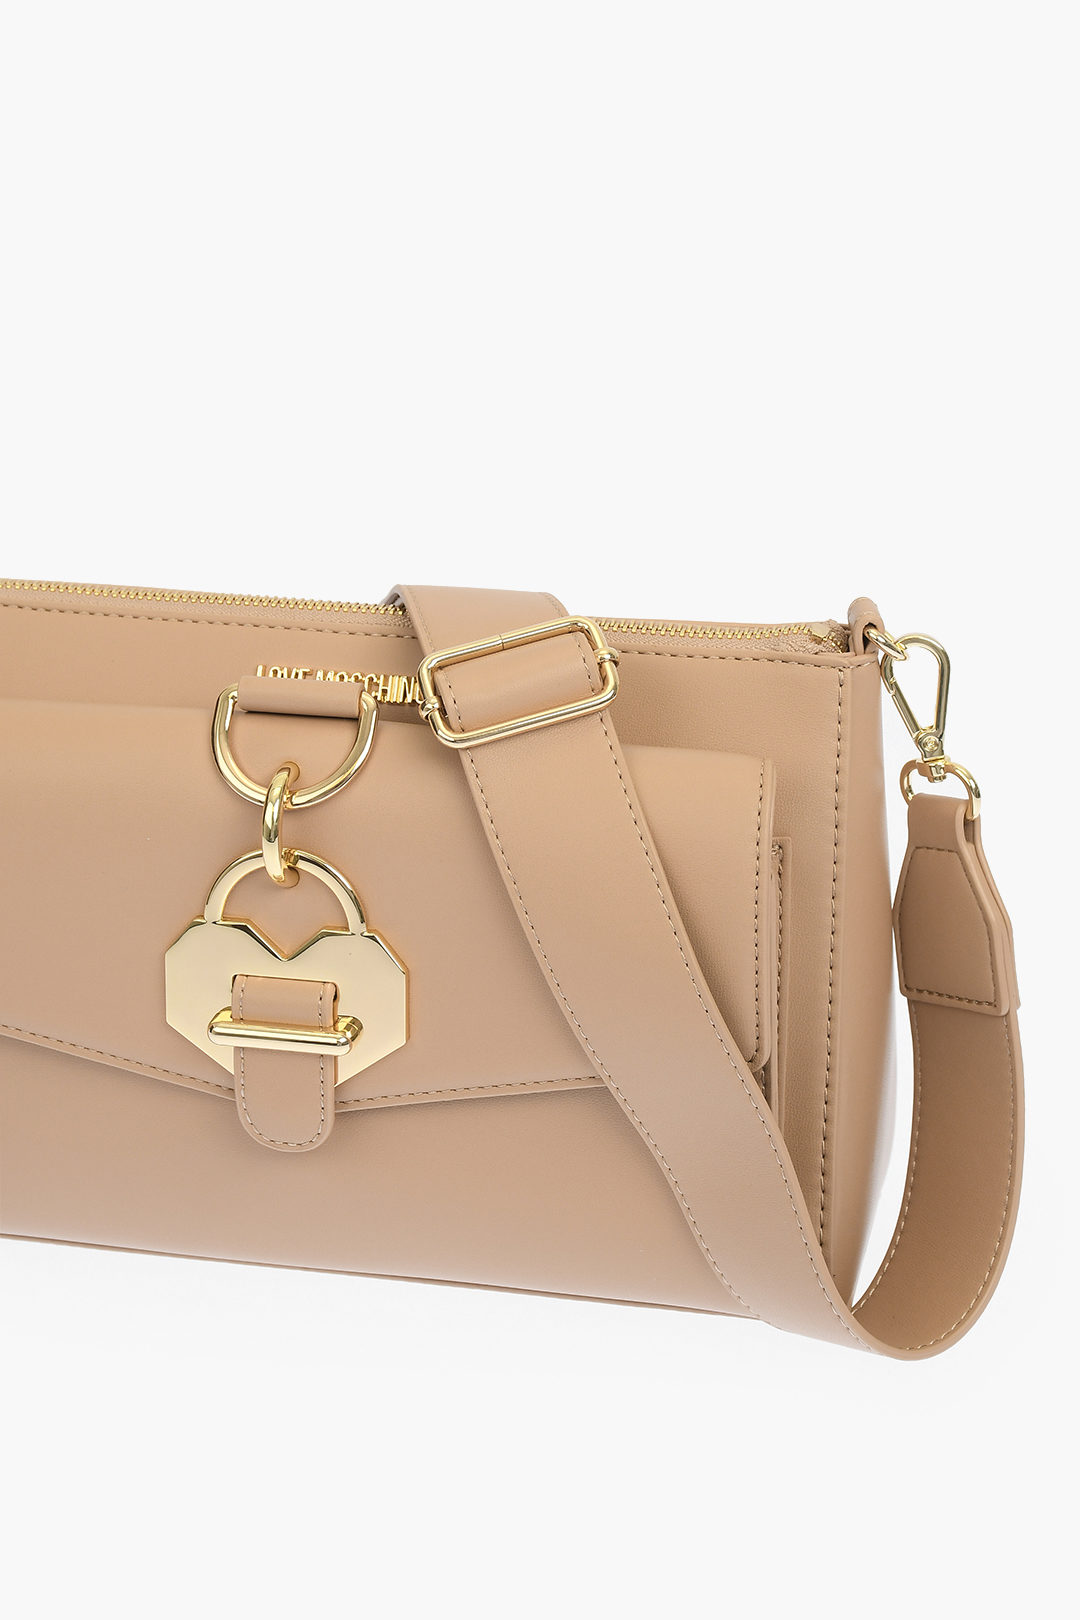 Gold Faux Leather Rectangle Crossbody Bag *FINAL SALE*